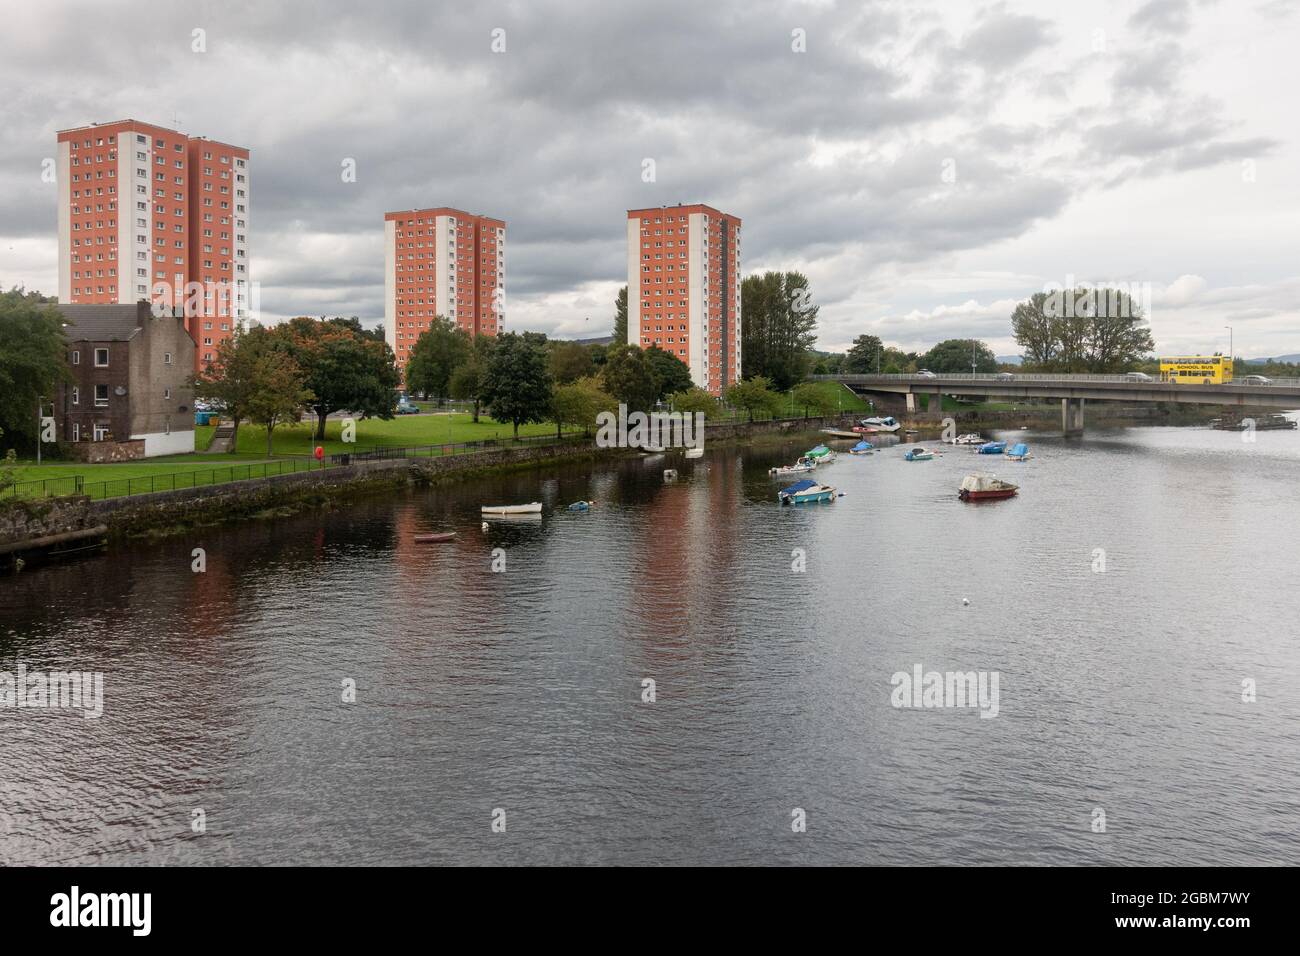 High rise tower blocks rise from the banks of the River Leven on the West Bridgend council estate in Dumbarton, Scotland. Stock Photo